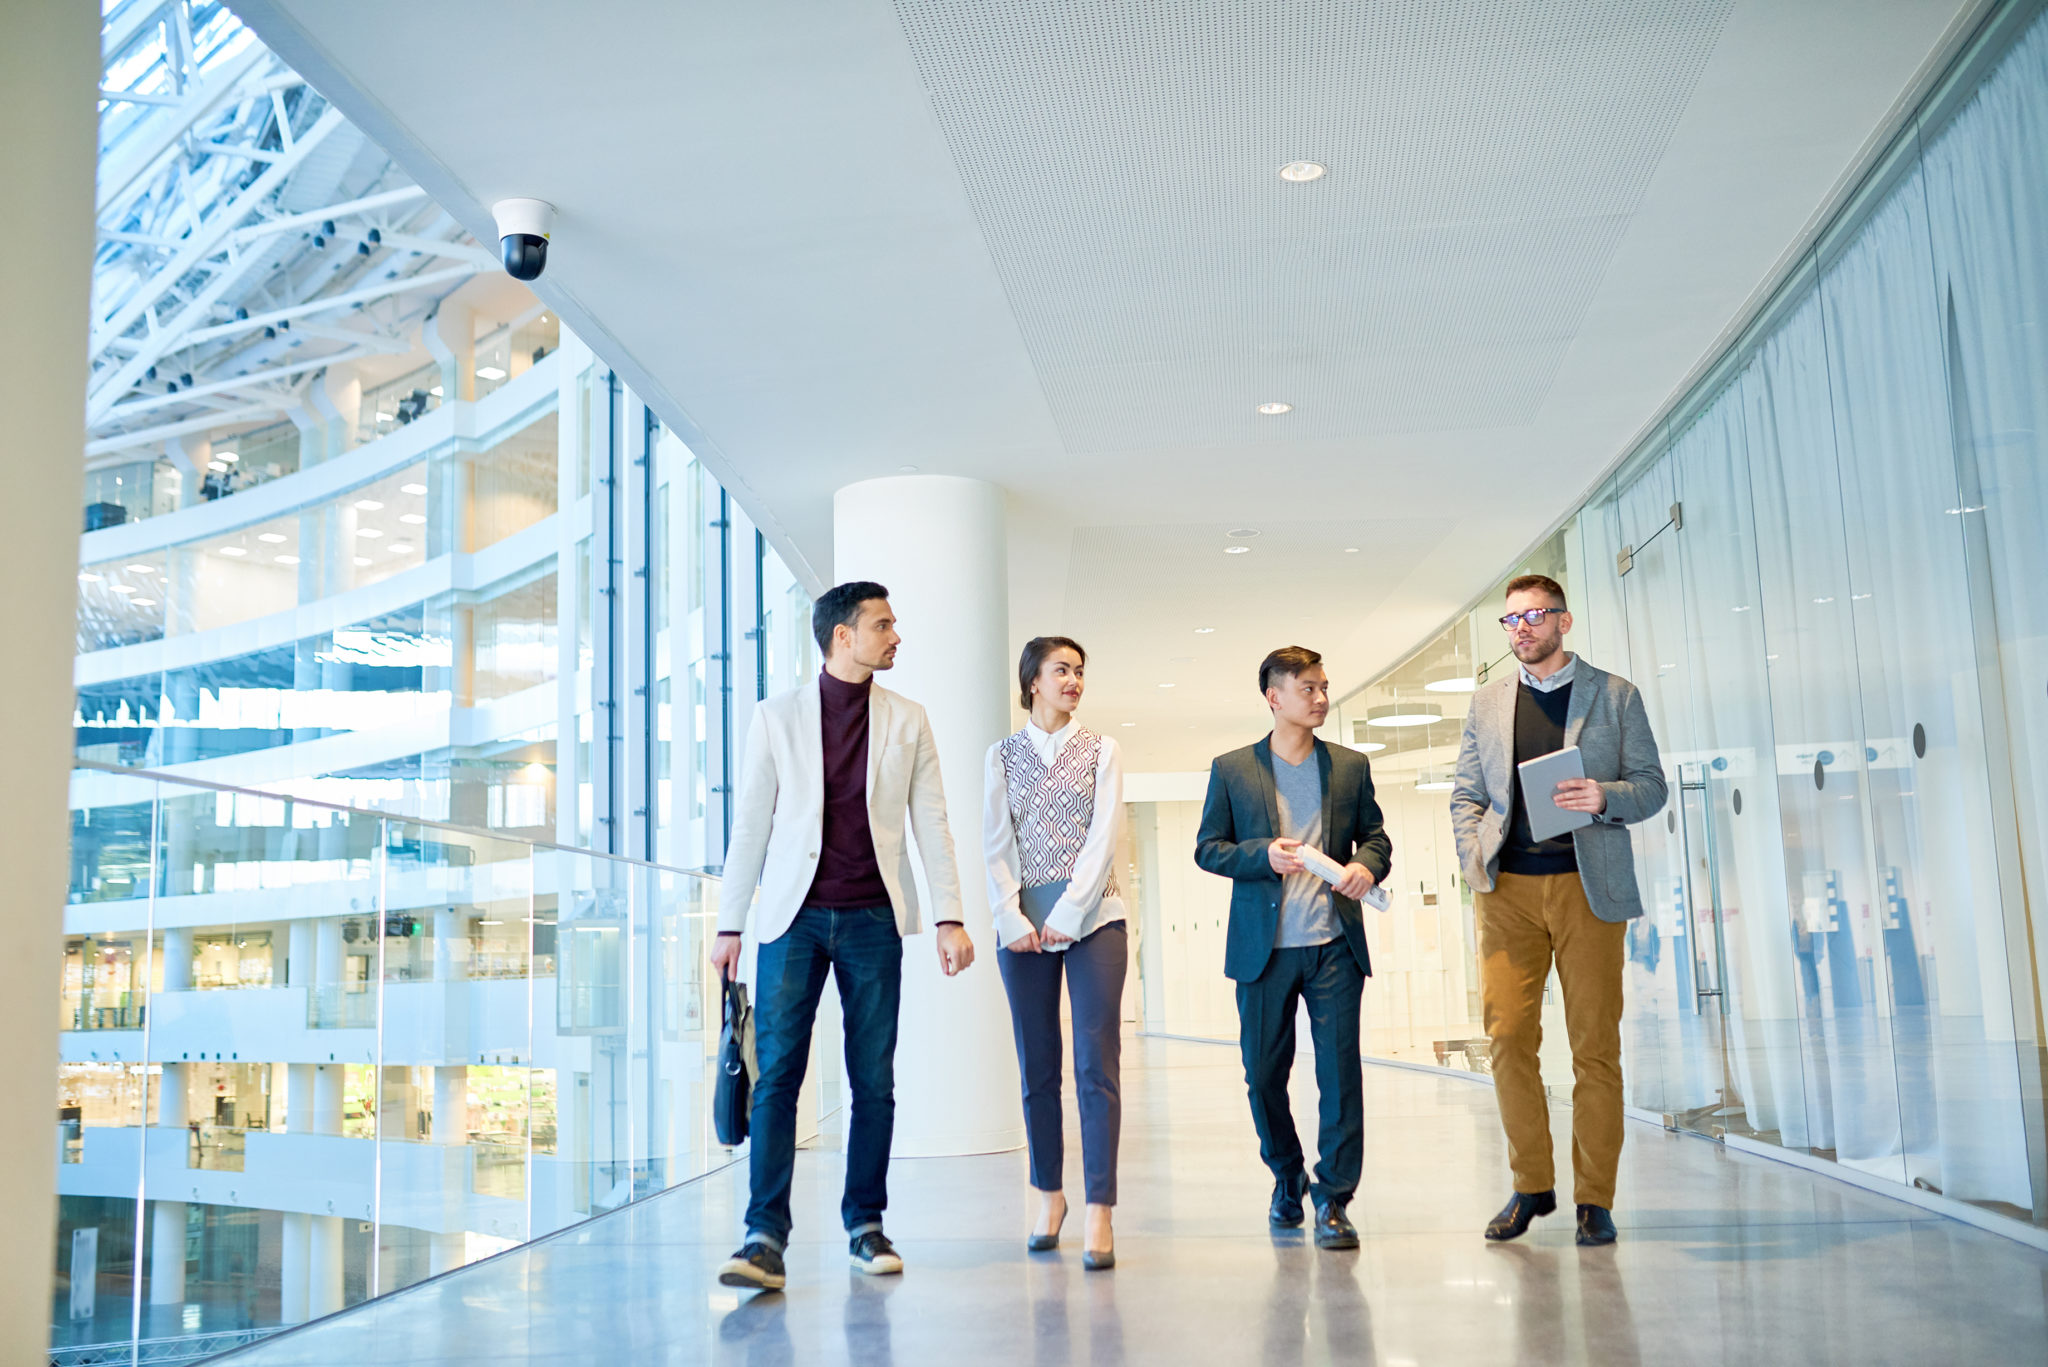 Professional services - people walking in modern building